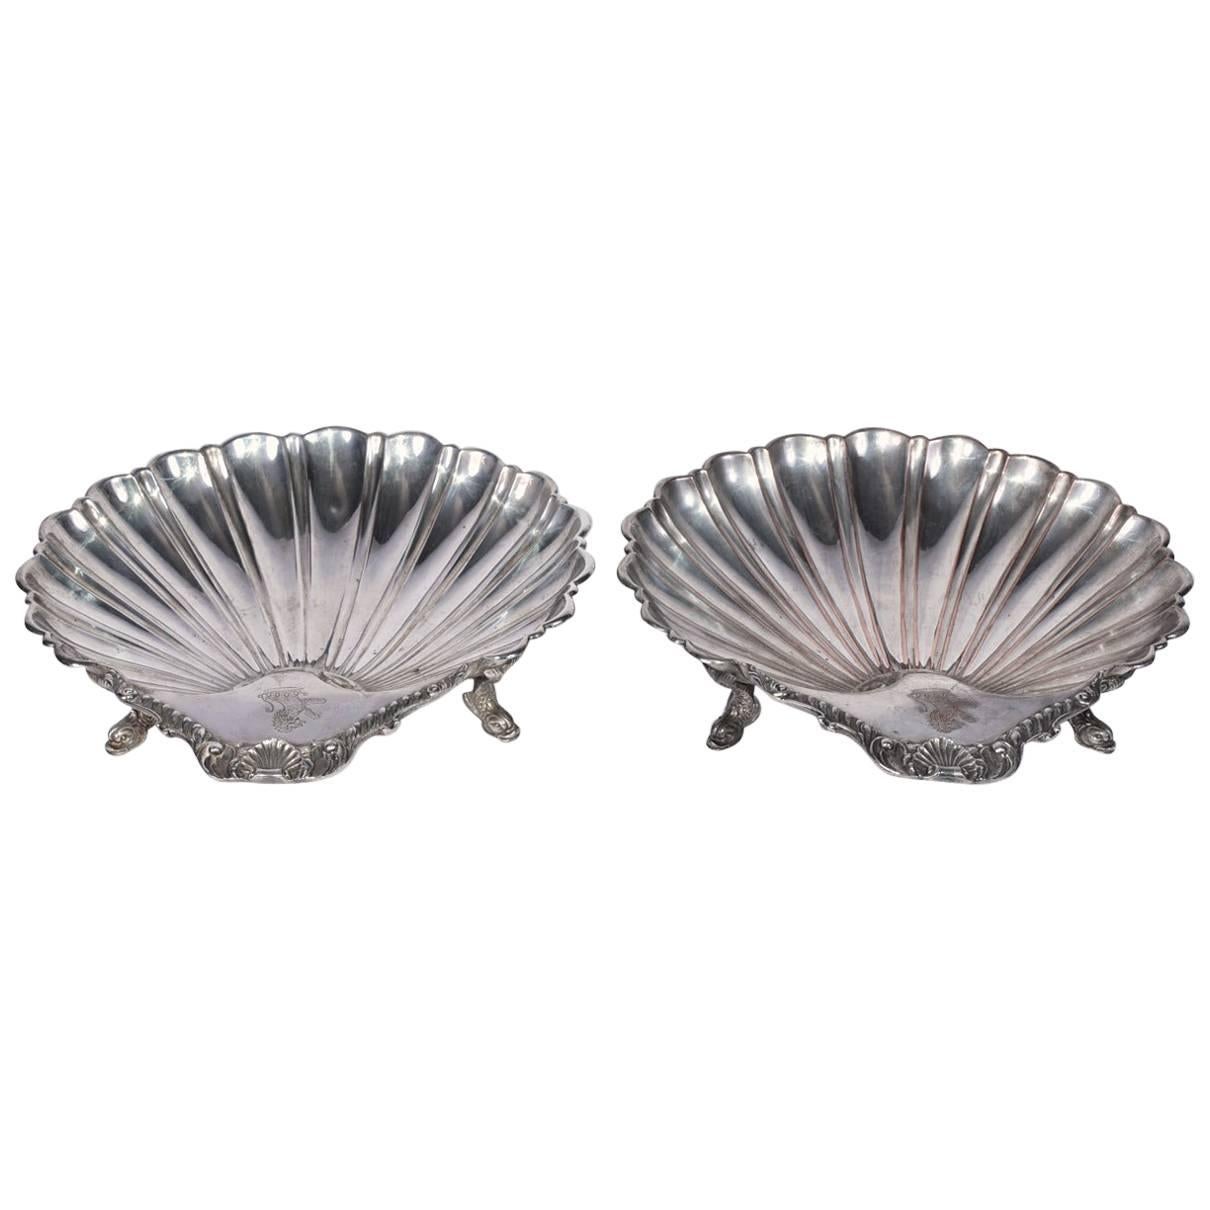 Pair of 19th Century British Silver Plated Scallop Shell Serving Dishes